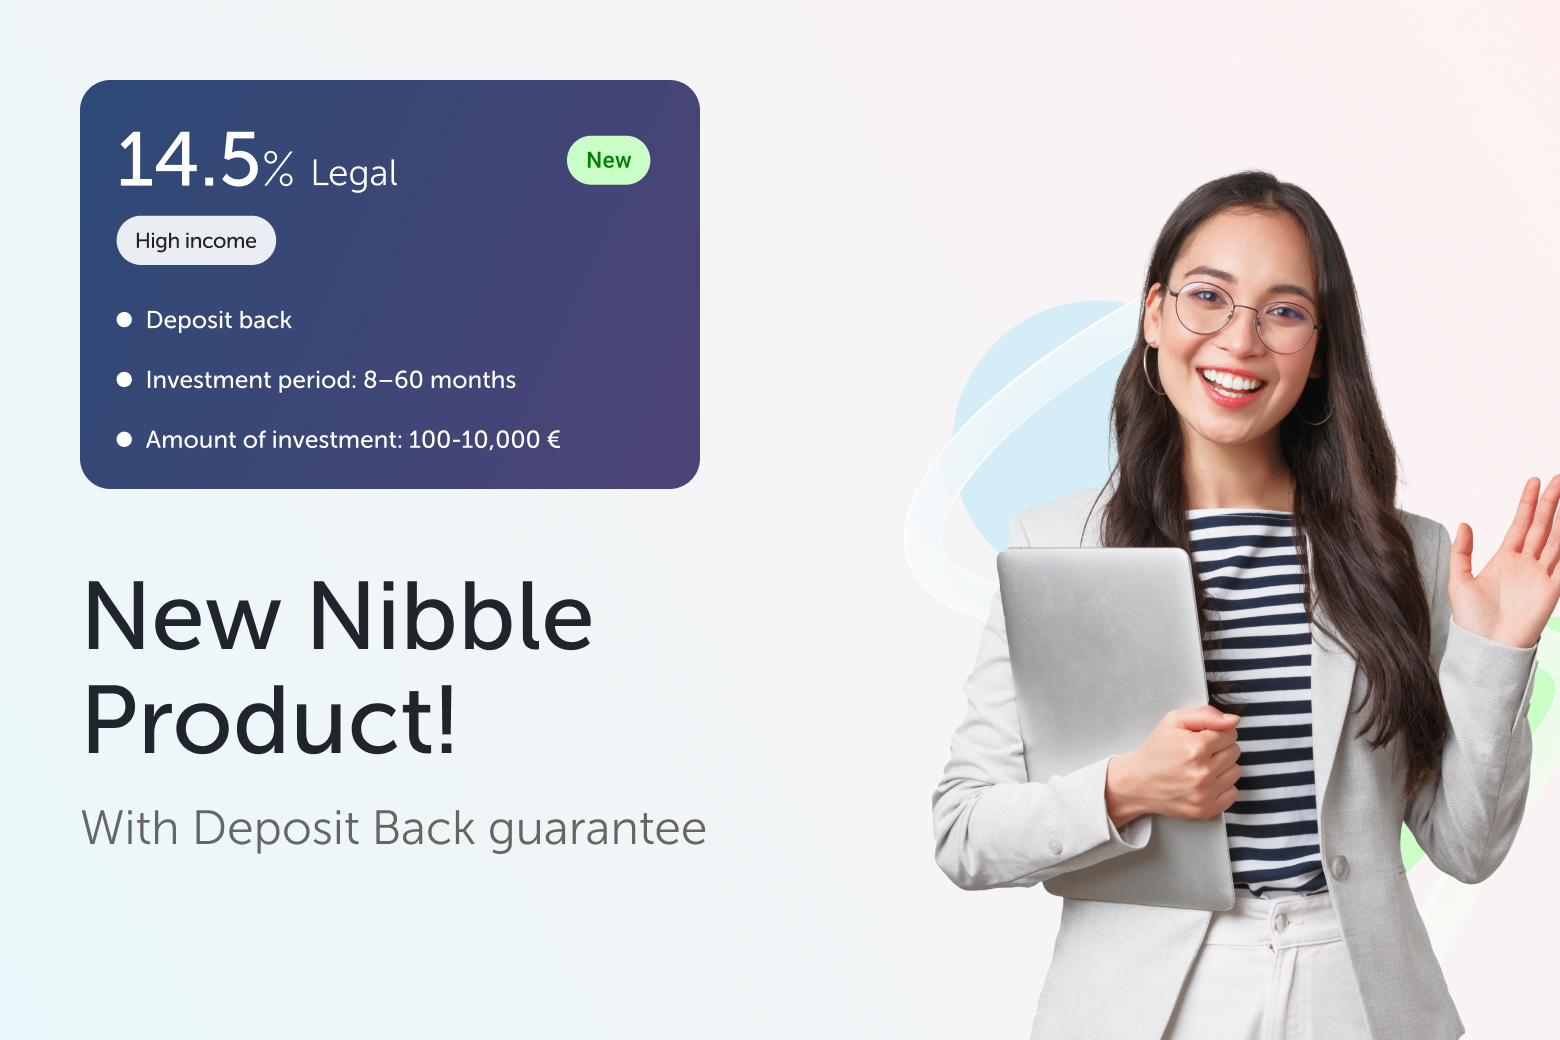 Nibble introduces new investment Strategy - Legal